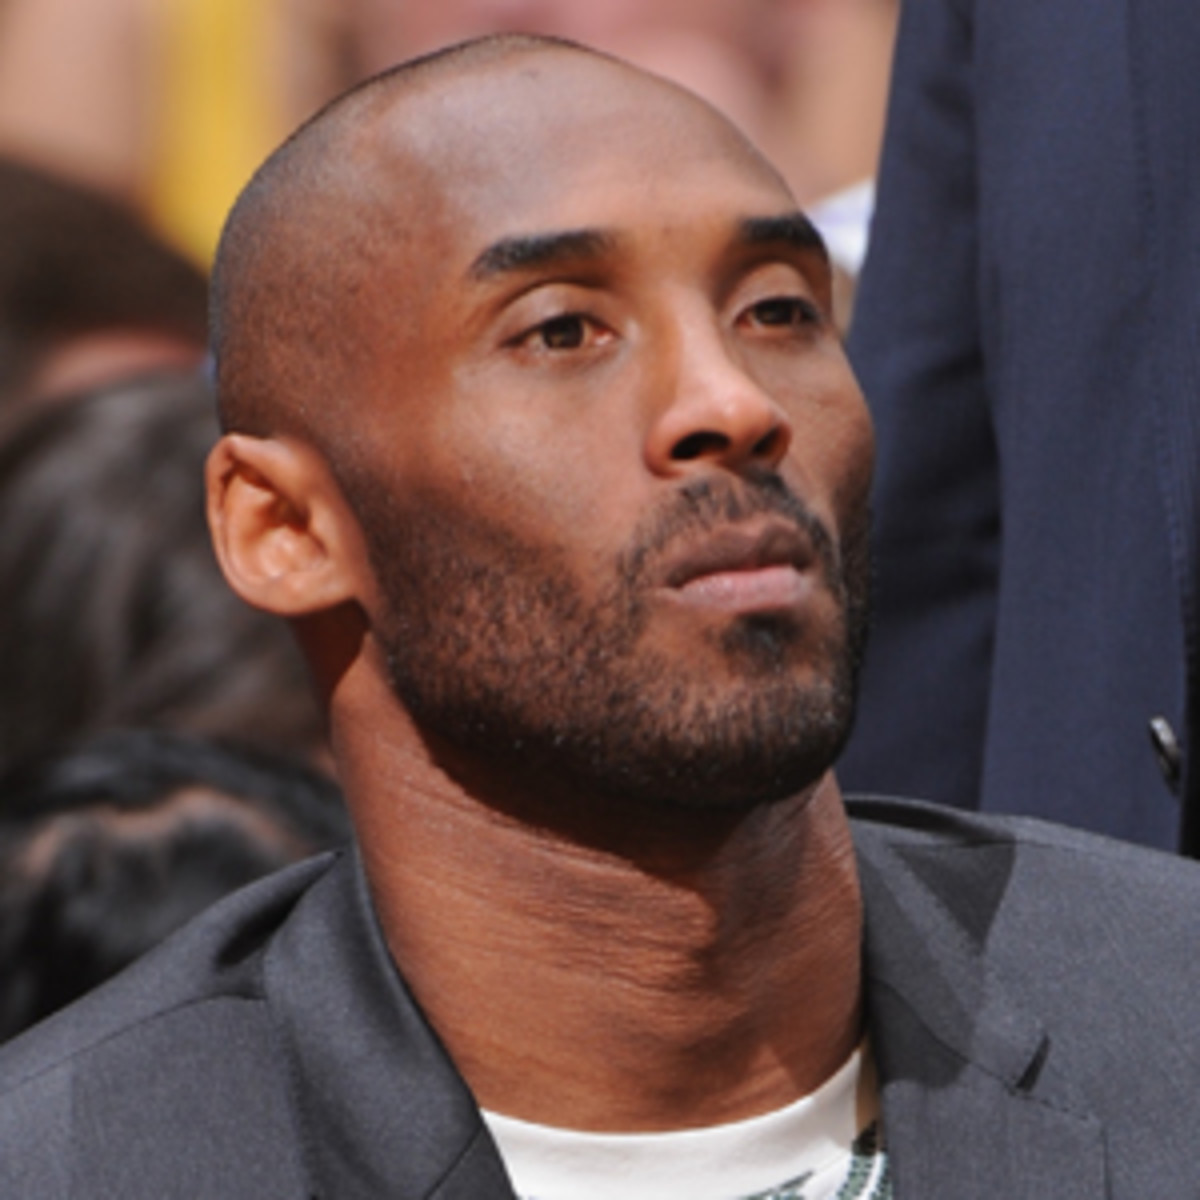 Kobe Bryant disputes his mom's legal rights to auction off his high school memorabilia. (Andrew D. Bernstein/NBAE via Getty Images)